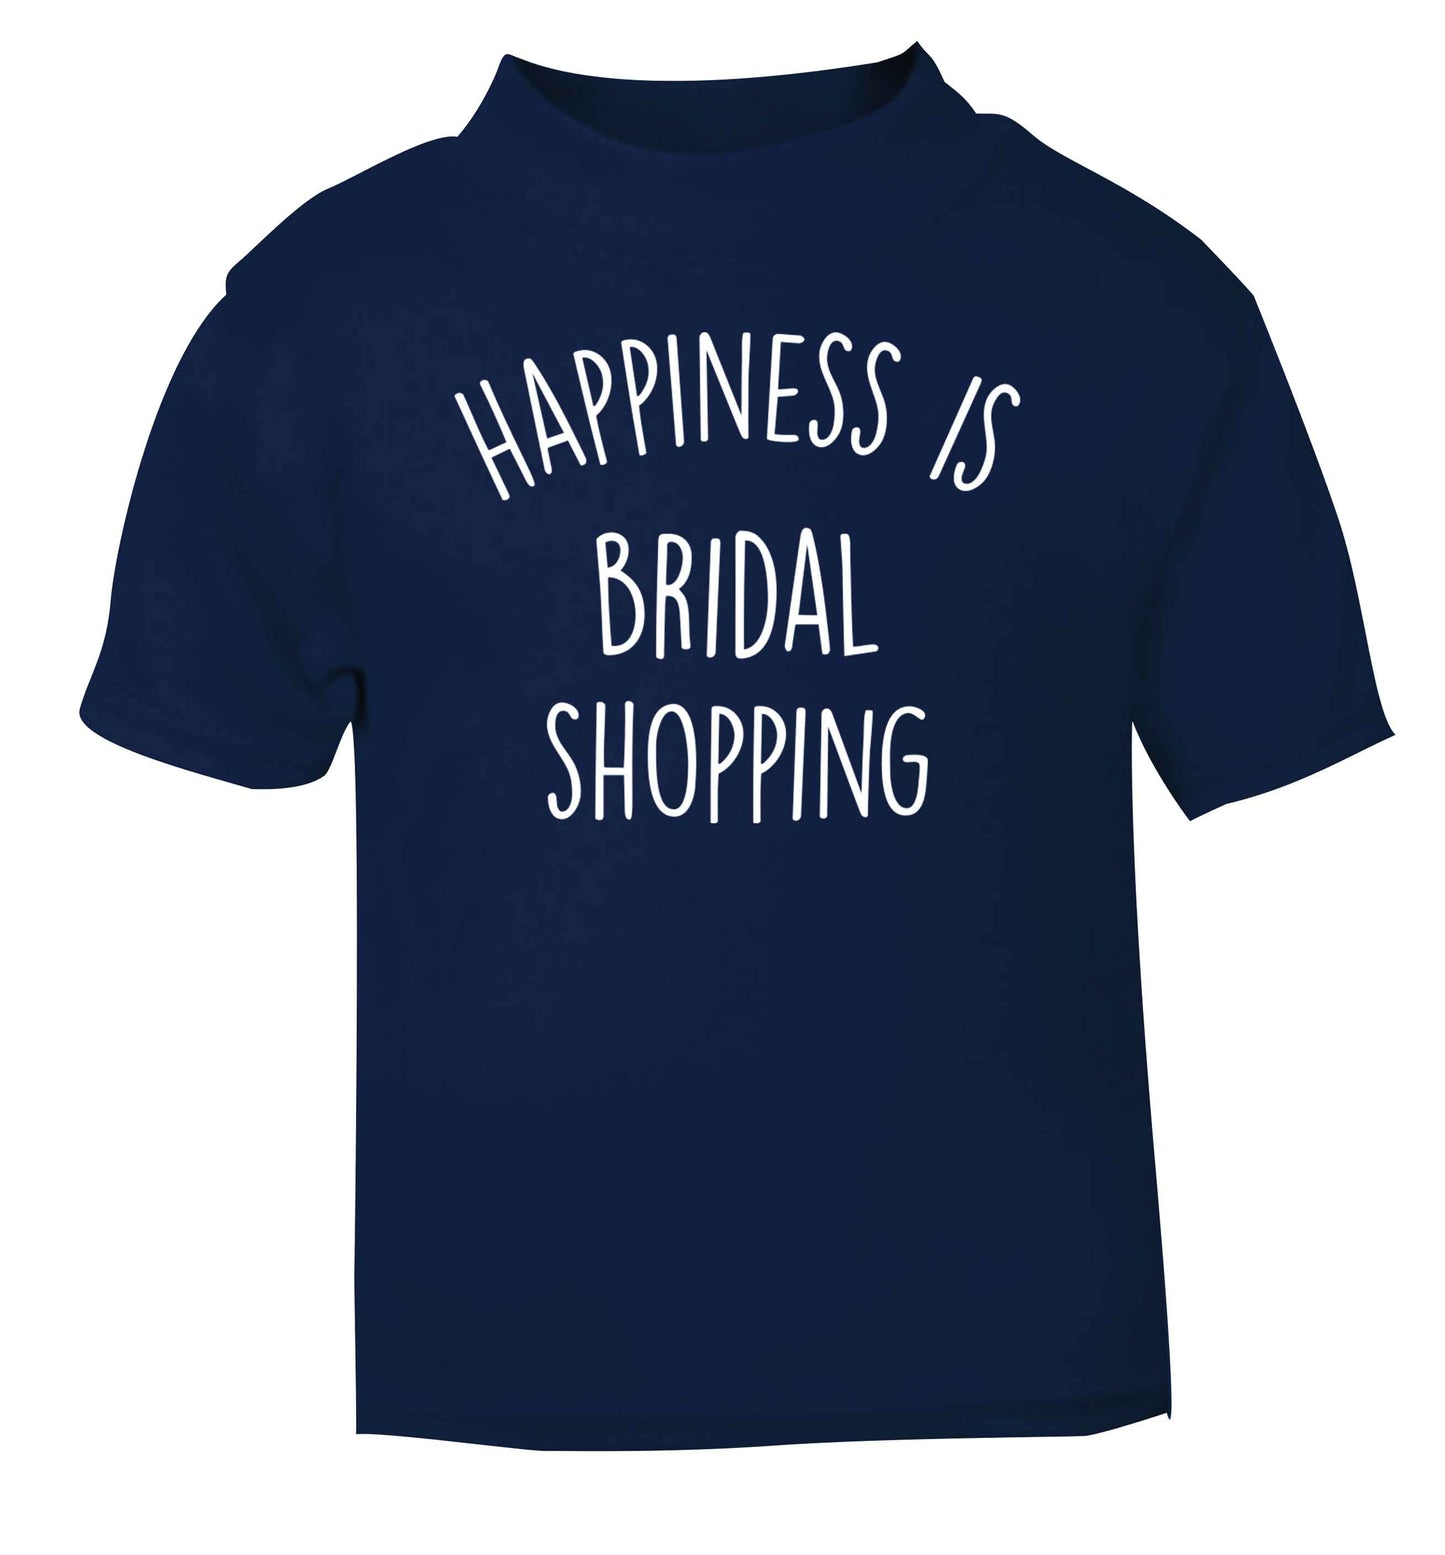 Happiness is bridal shopping navy baby toddler Tshirt 2 Years